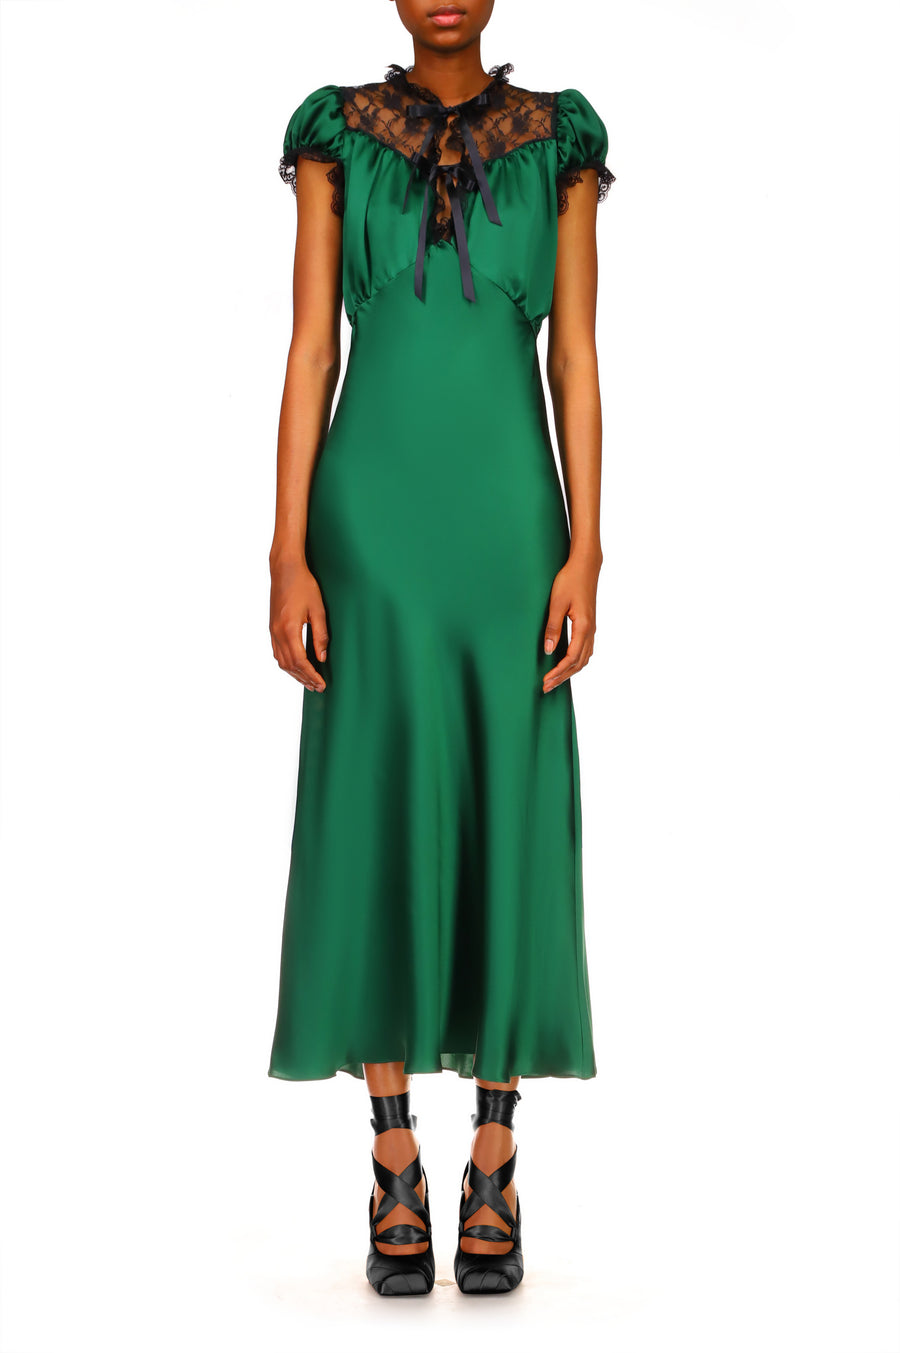 Green Silk Satin Bias Dress With Lace And Ruffle Details